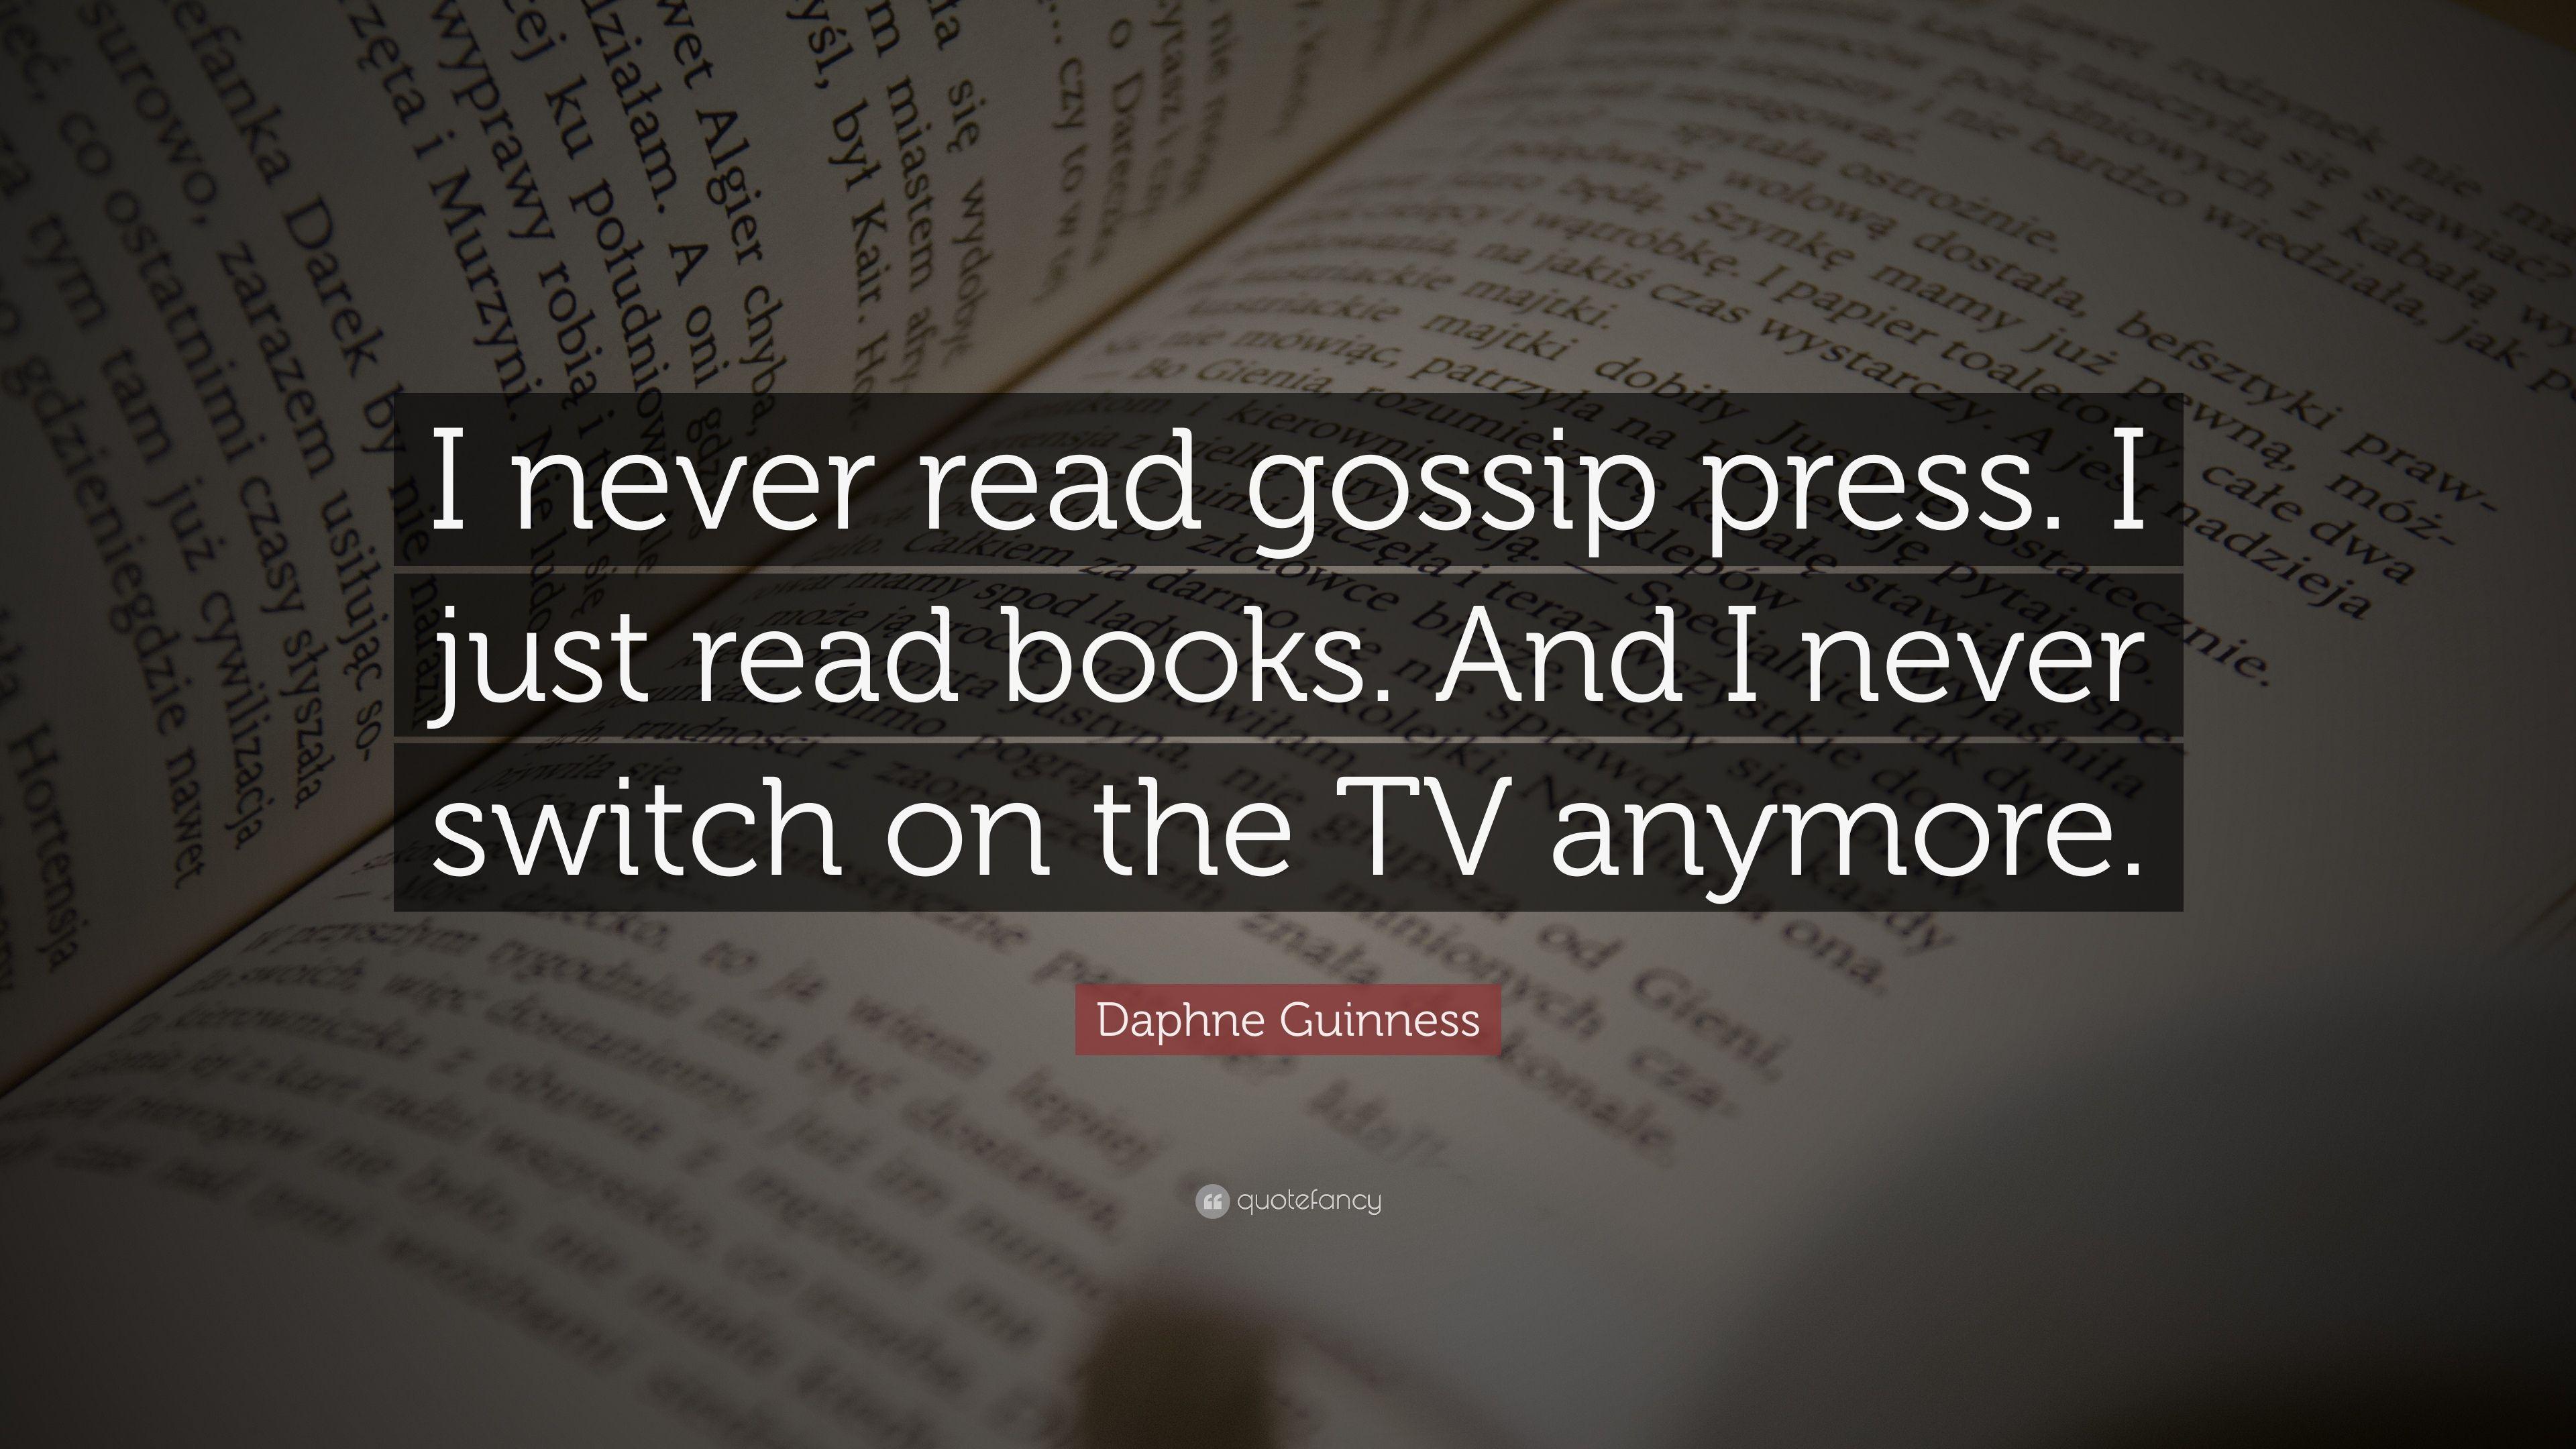 Daphne Guinness Quote: “I never read gossip press. I just read